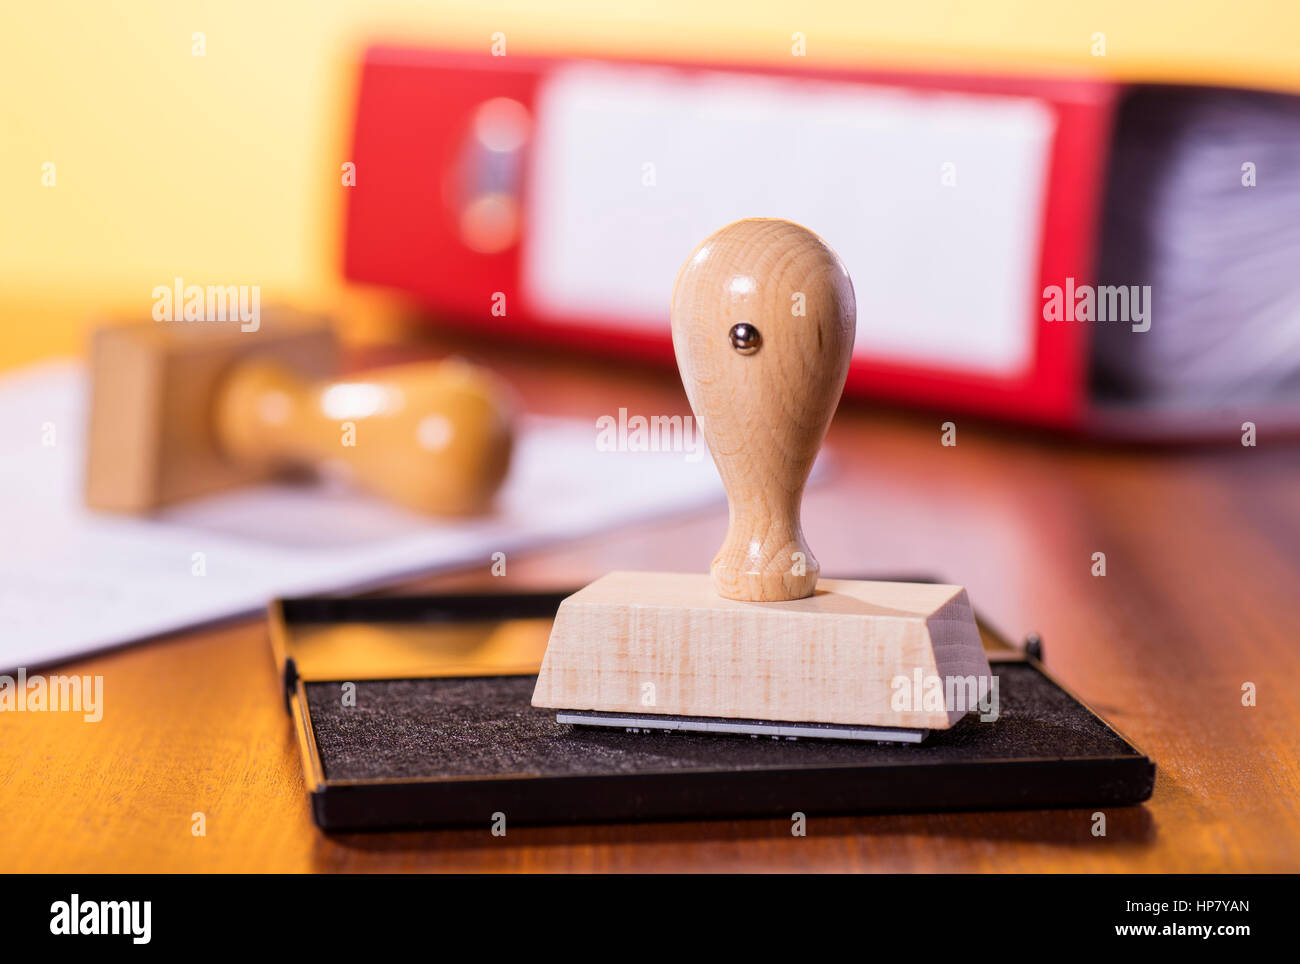 Desk with stamp, file folder and a document. Stock Photo